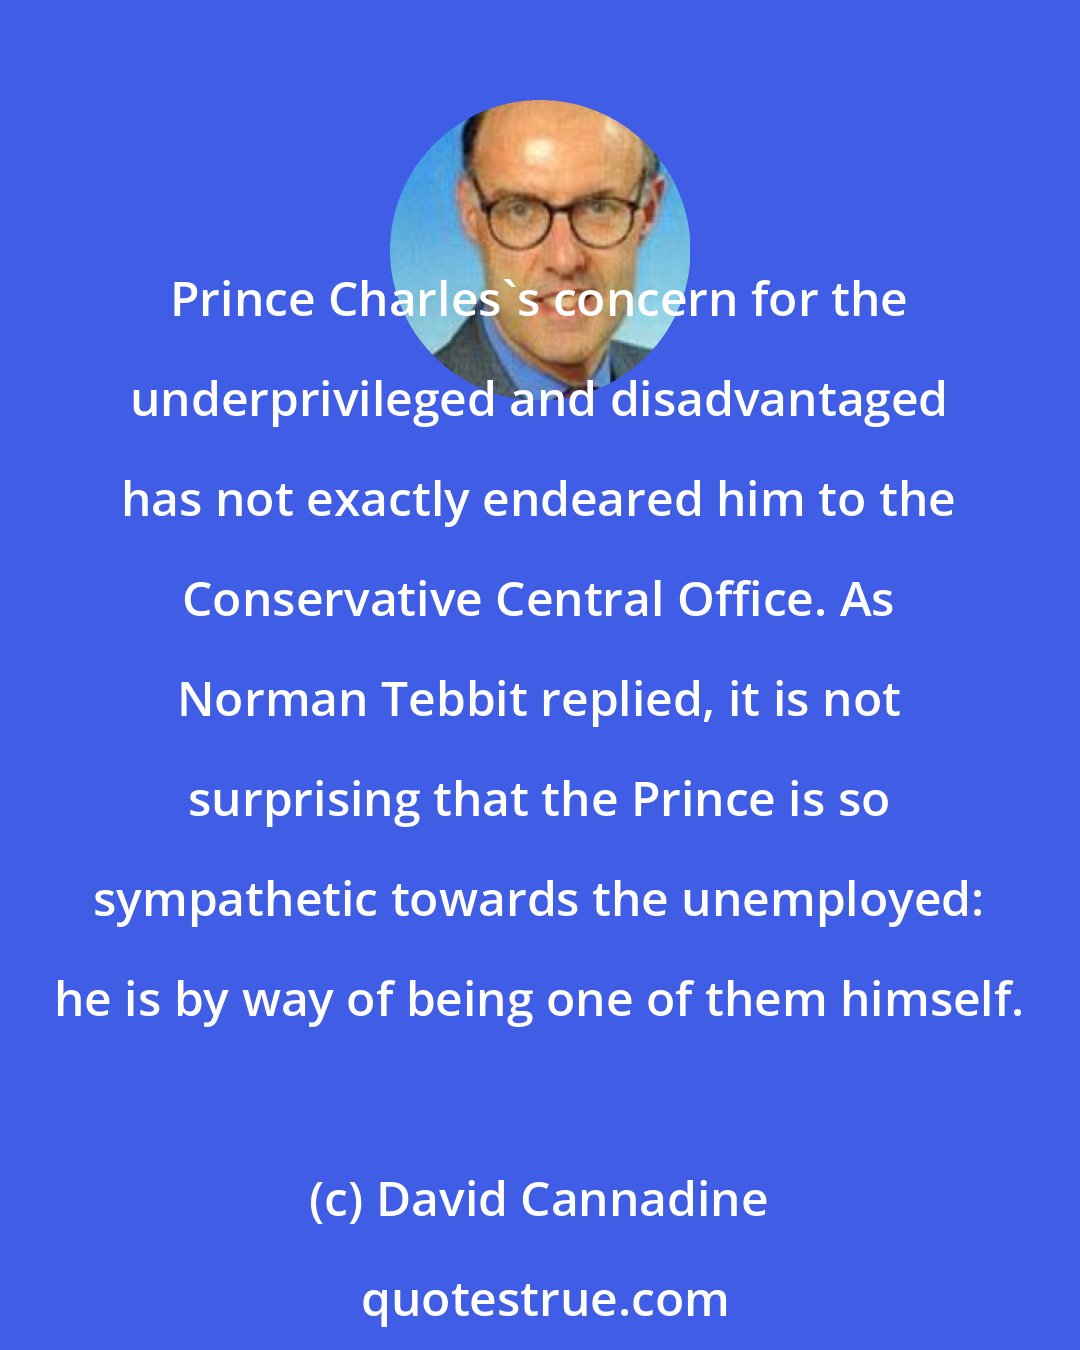 David Cannadine: Prince Charles's concern for the underprivileged and disadvantaged has not exactly endeared him to the Conservative Central Office. As Norman Tebbit replied, it is not surprising that the Prince is so sympathetic towards the unemployed: he is by way of being one of them himself.